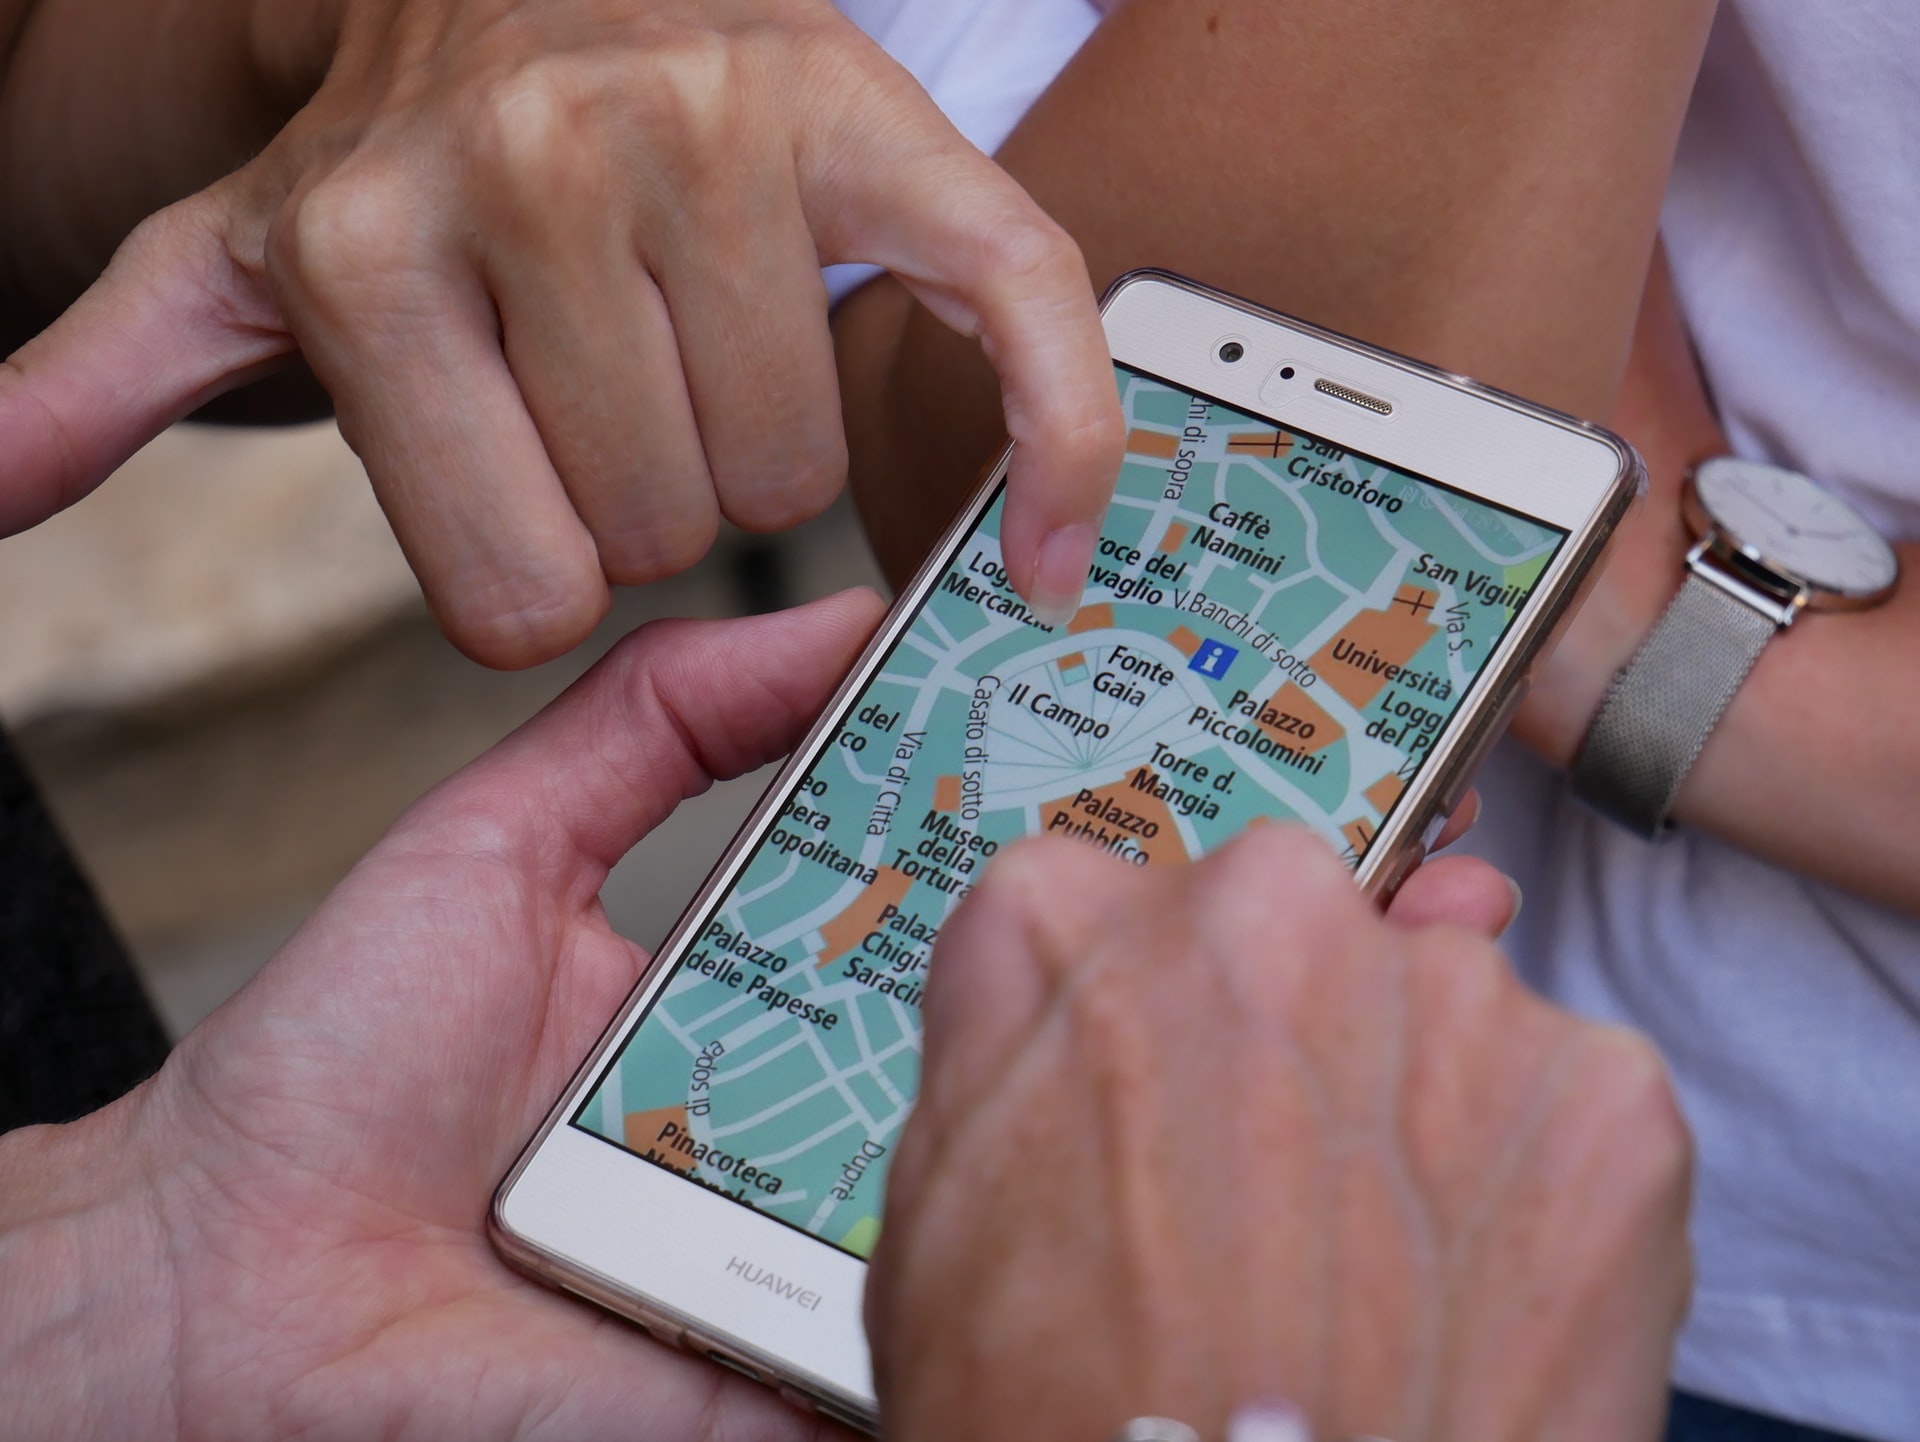 Using a map on a smartphone. Photo by Sebastian Hietsch on Unsplash